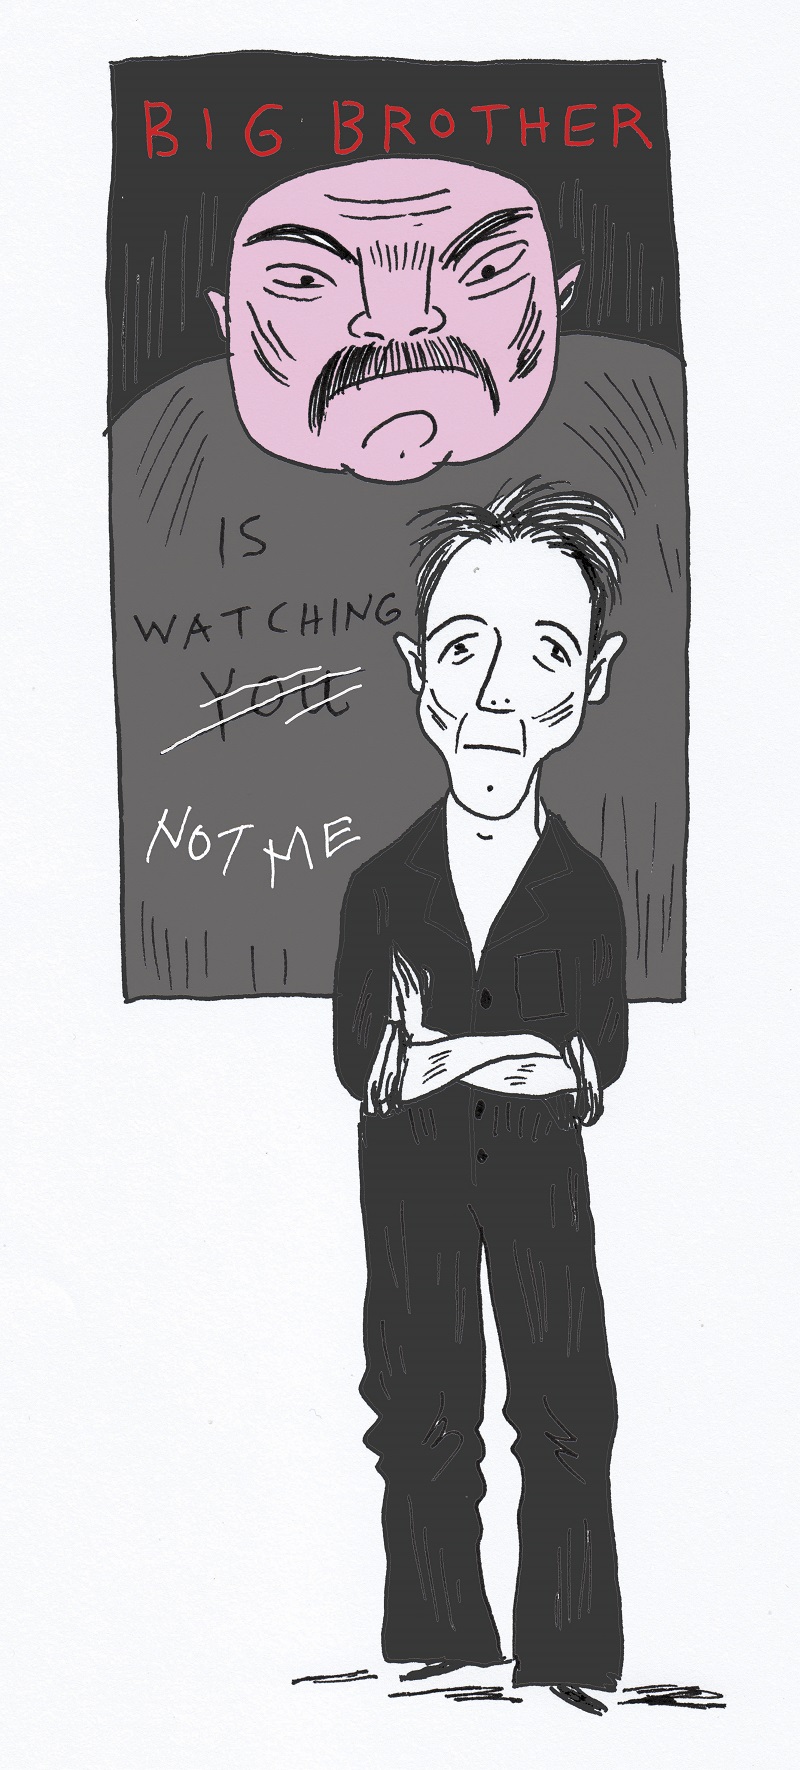 A cartoon illustration by John Levers of 1984's Winston Smith in front of a poster that reads "Big Brother is watching you"